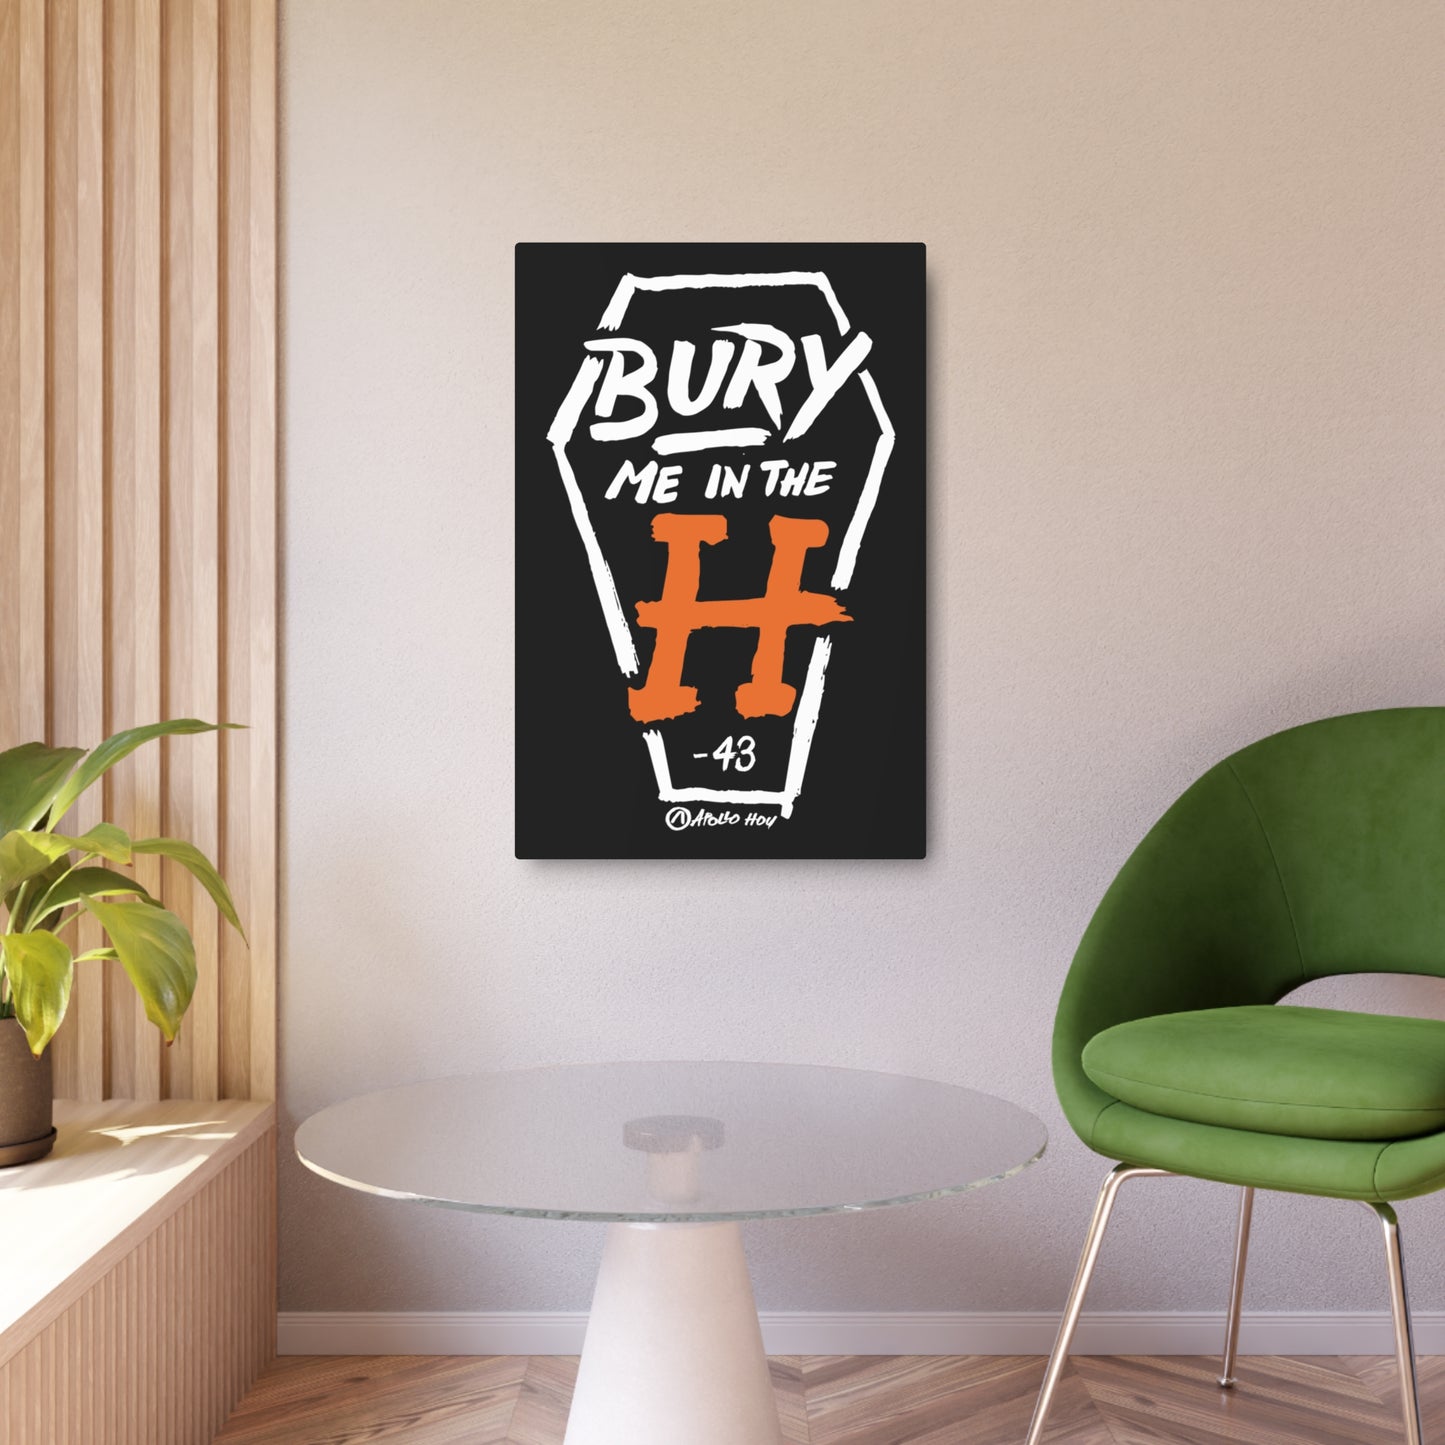 Bury Me In The H (Coffin) Metal Art Sign